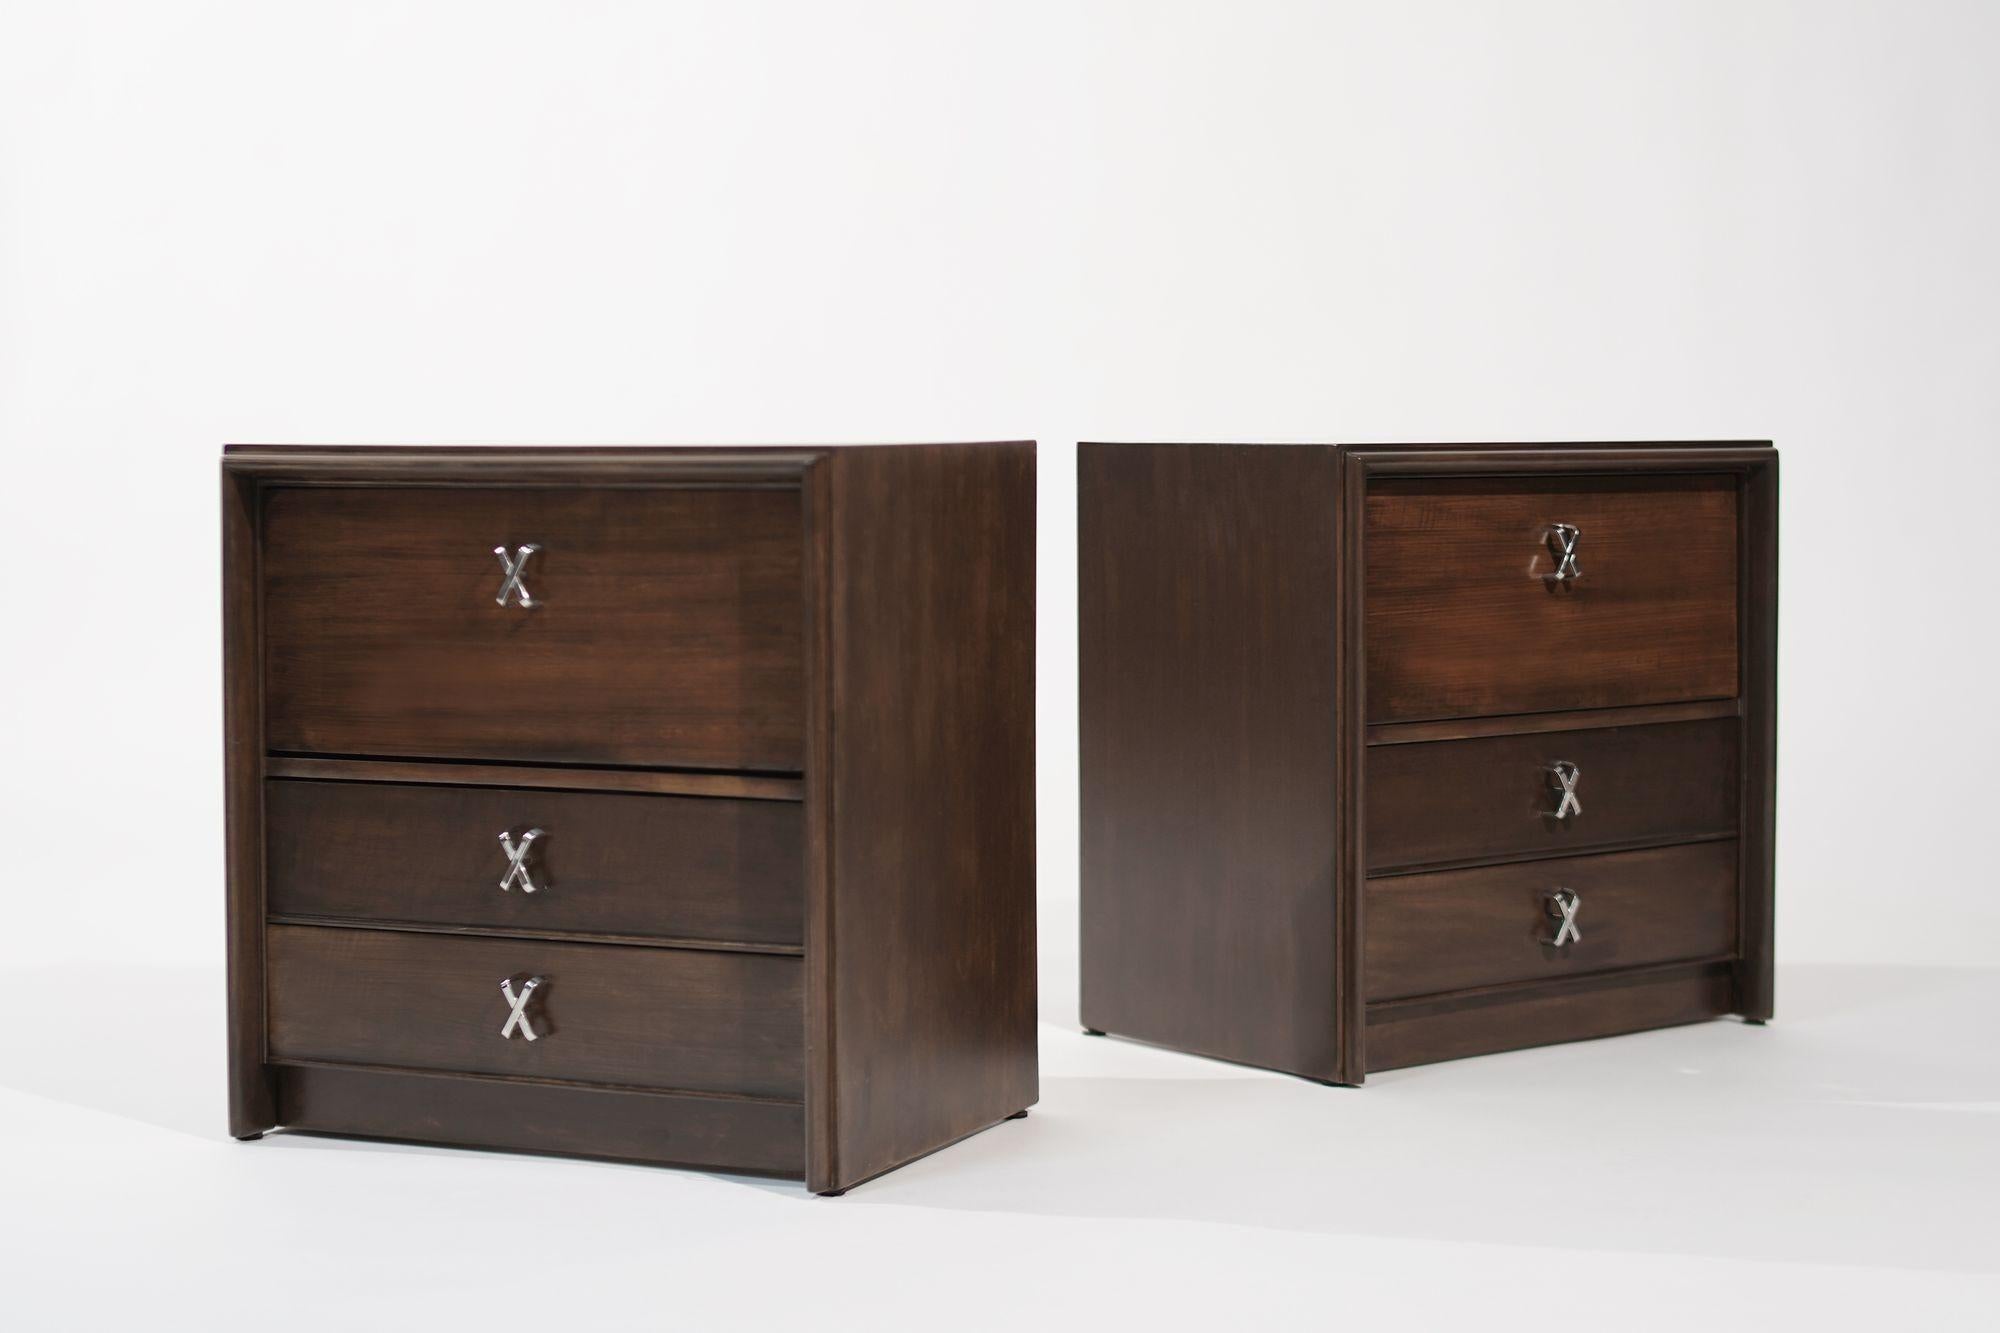 Nickel Set of Nightstands by Paul Frankl, C. 1950s For Sale